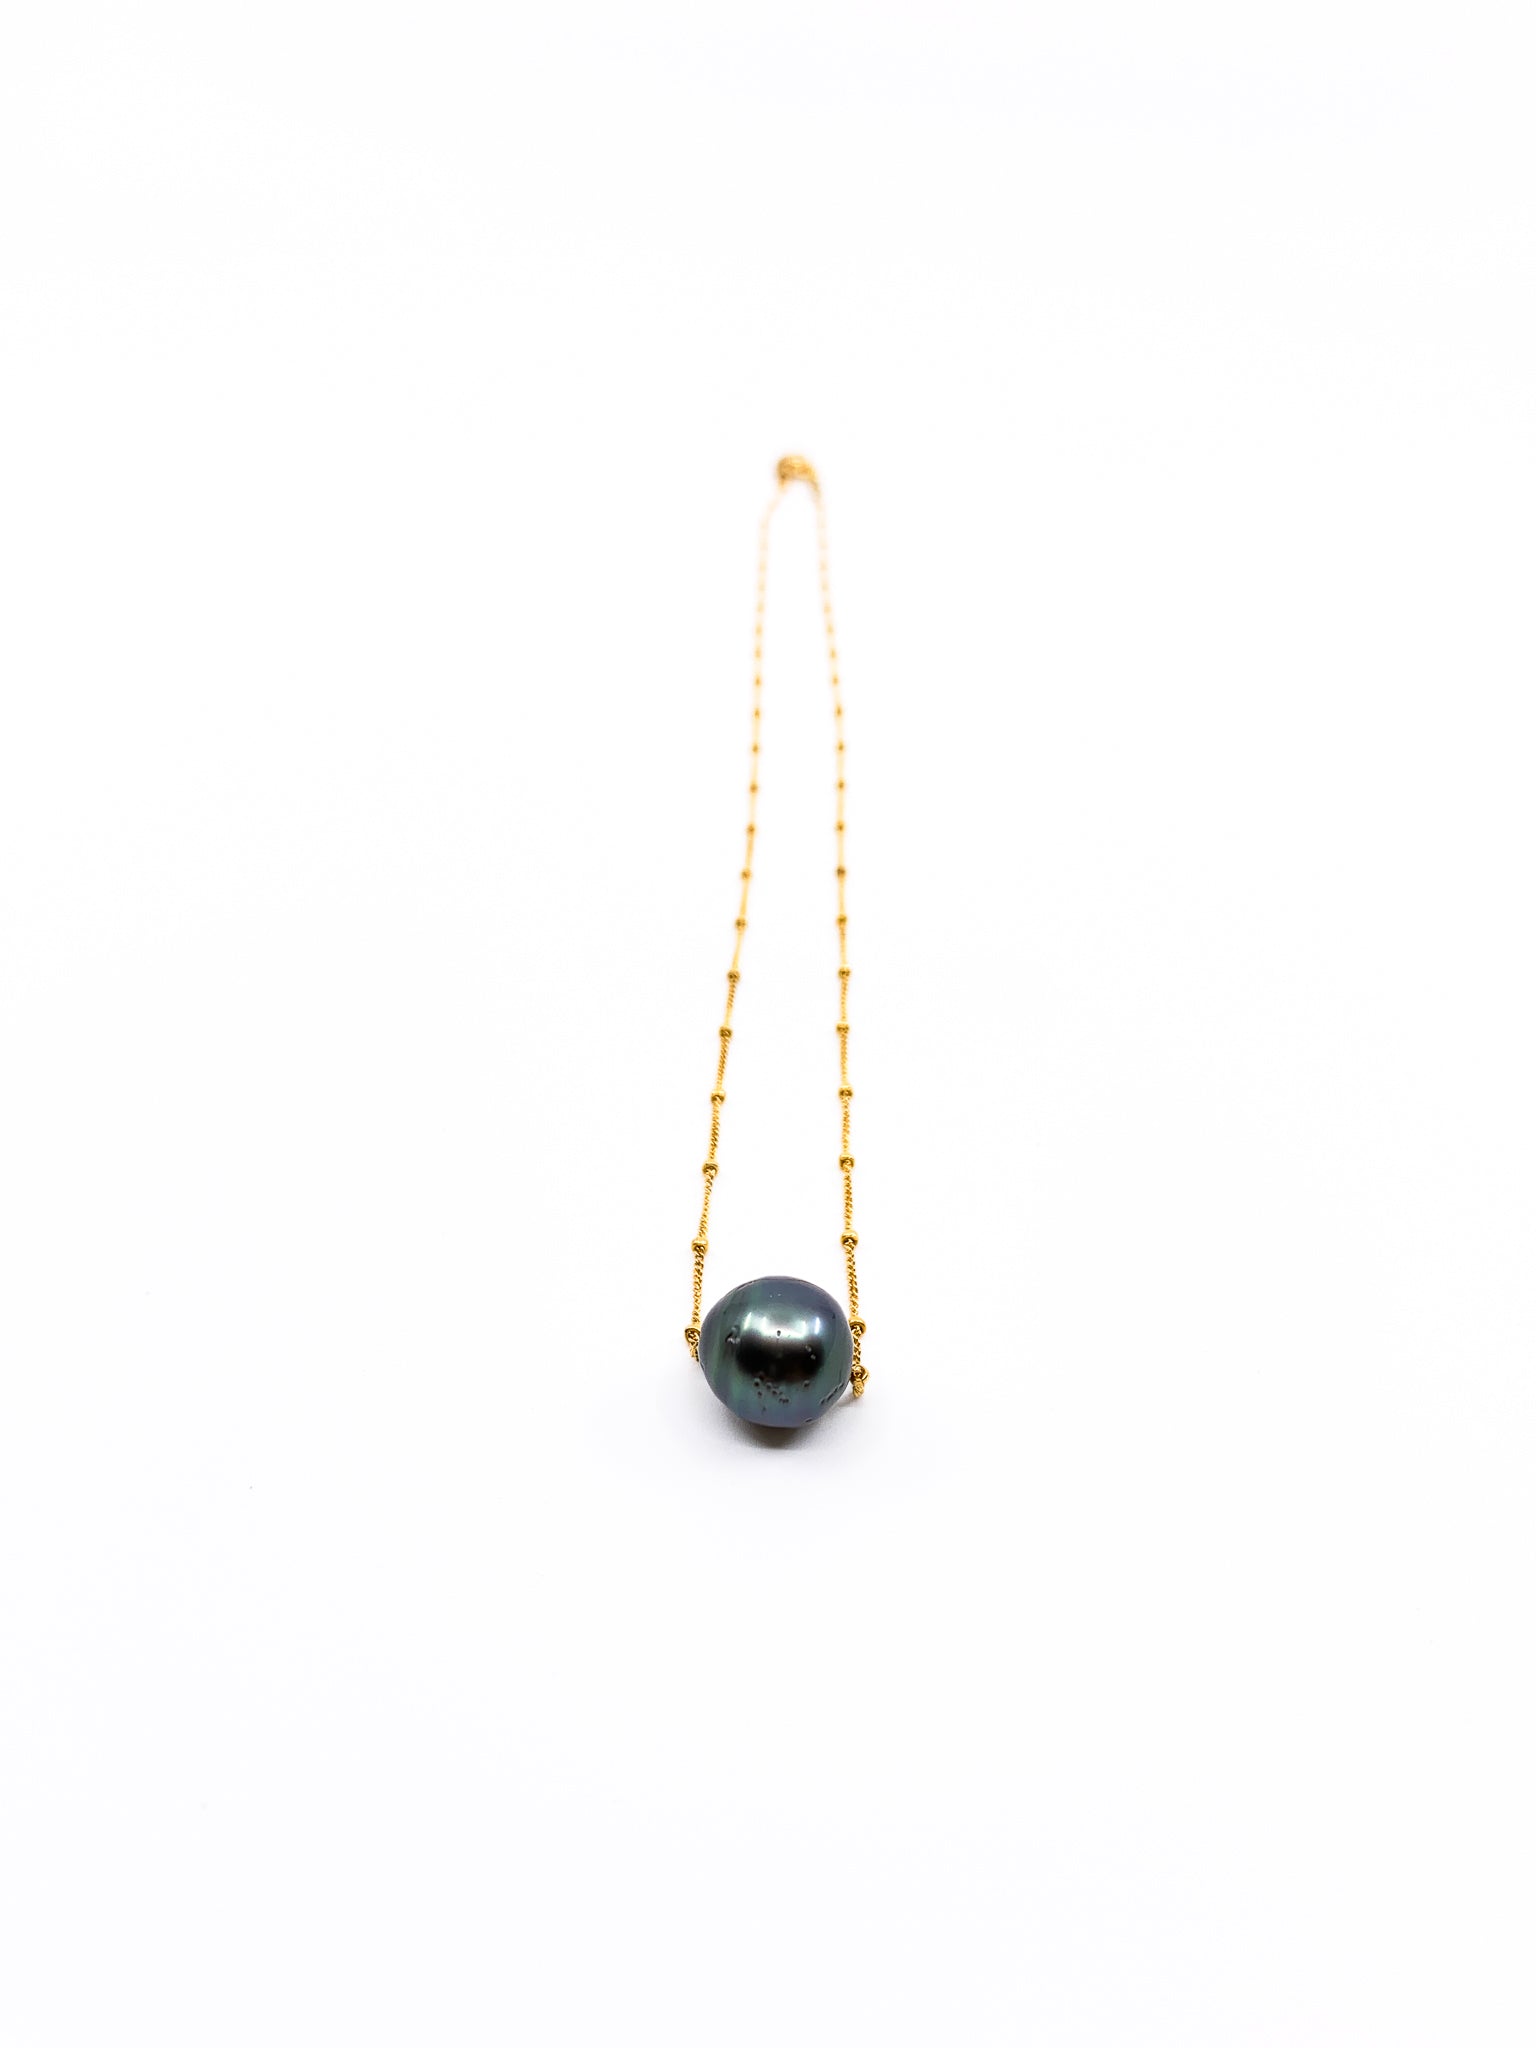 Tahitian pearl delicate gold chain necklace by eve black jewelry made in Hawaii